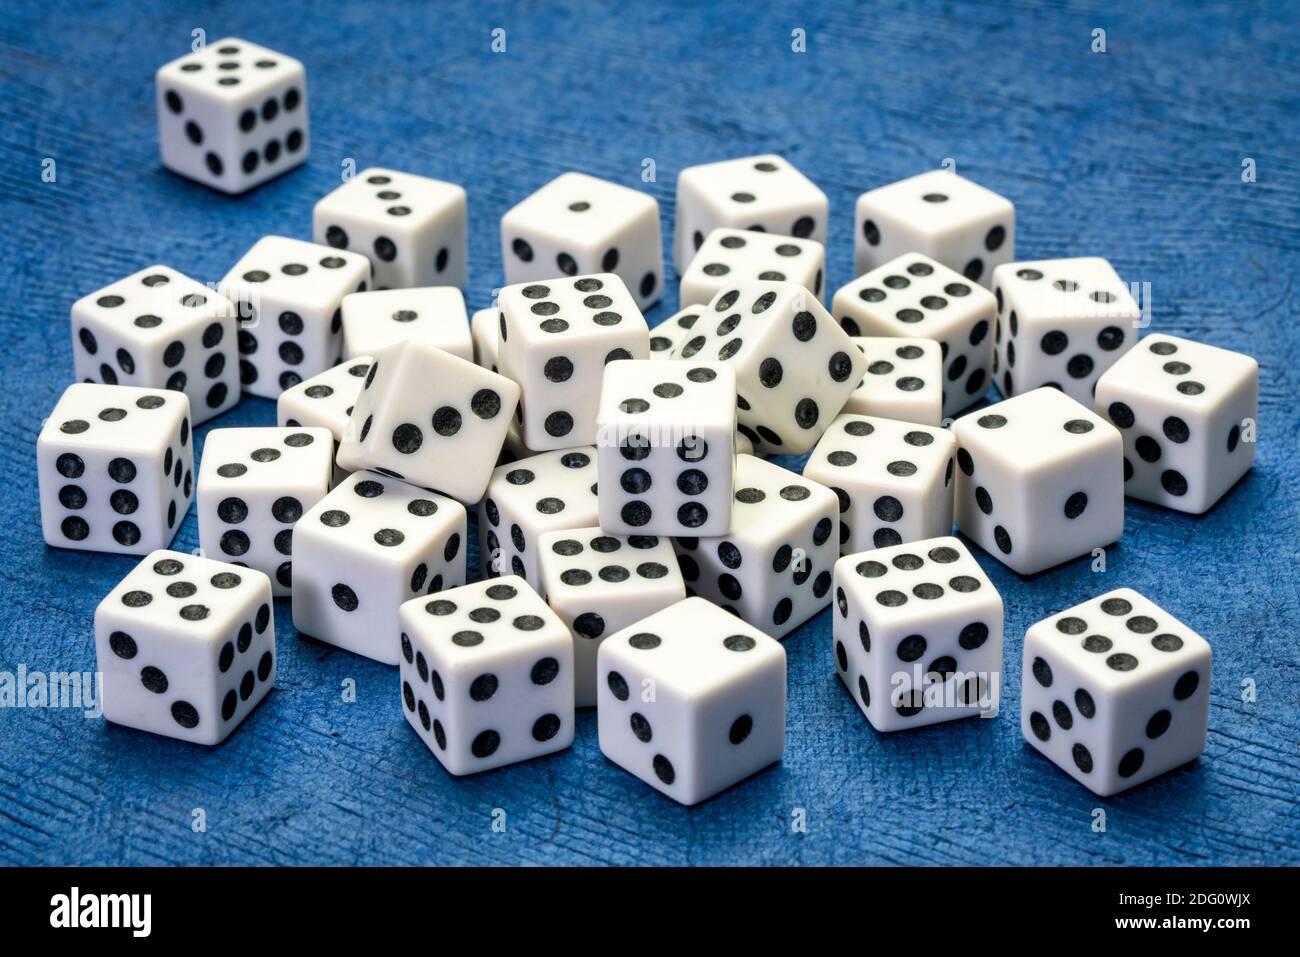 pile of white cubic dice with black pips (dots) against blue handmade paper, game, gamble, chance and risk concept Stock Photo